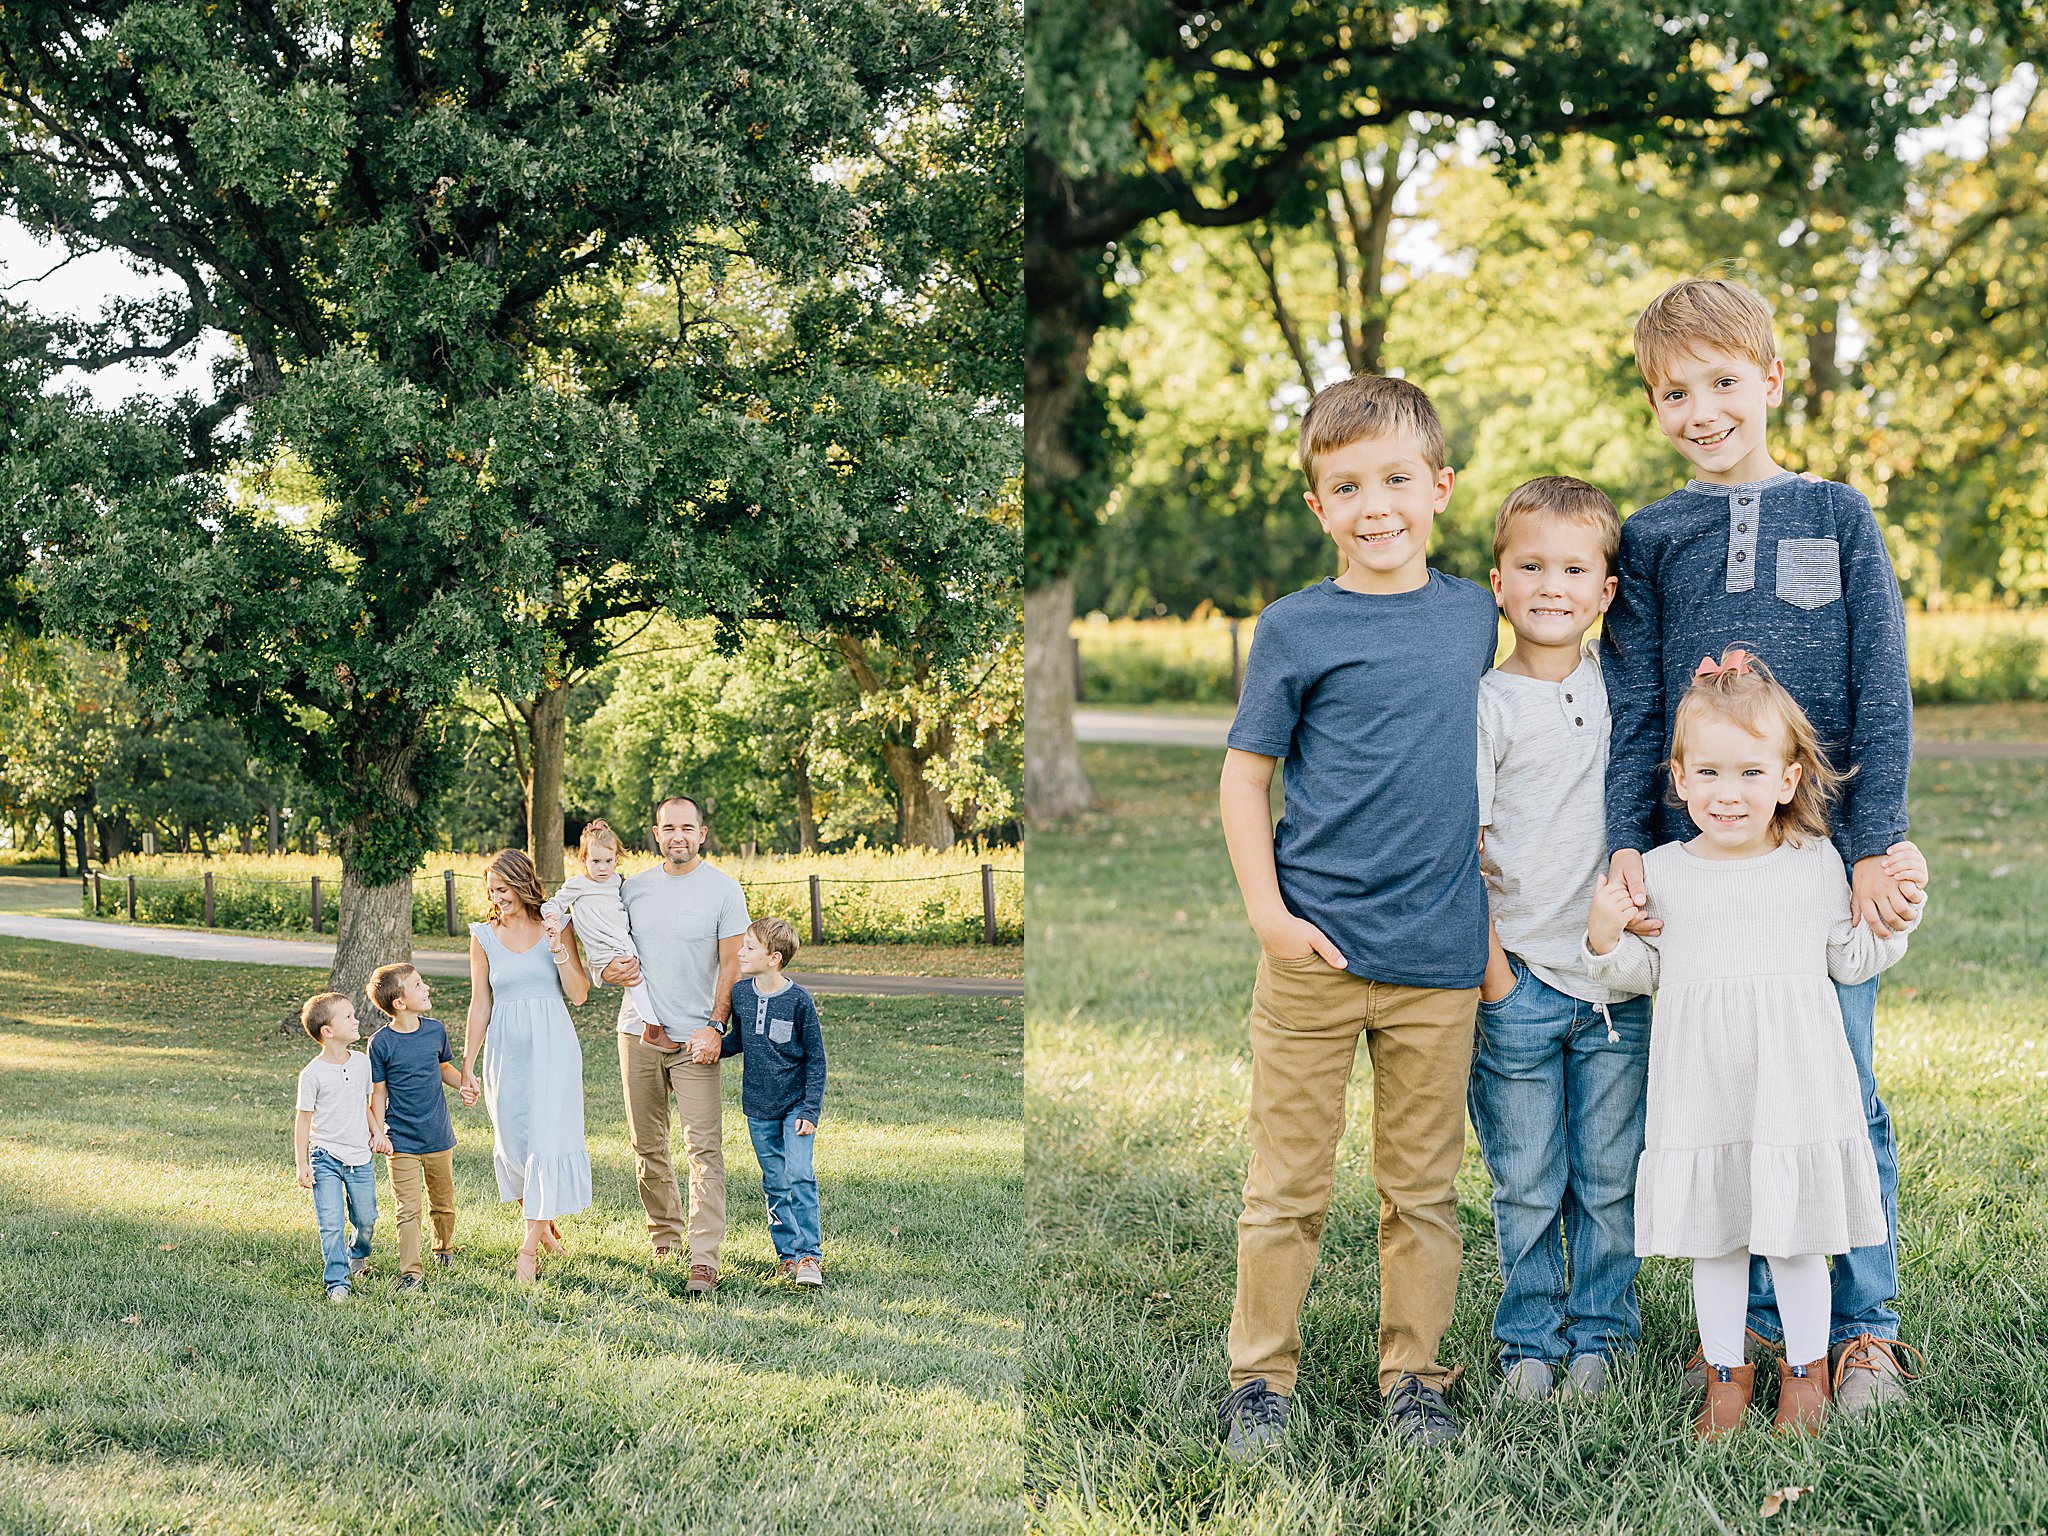 Family smiling in 5 easy ways to prepare your kids for family photos.